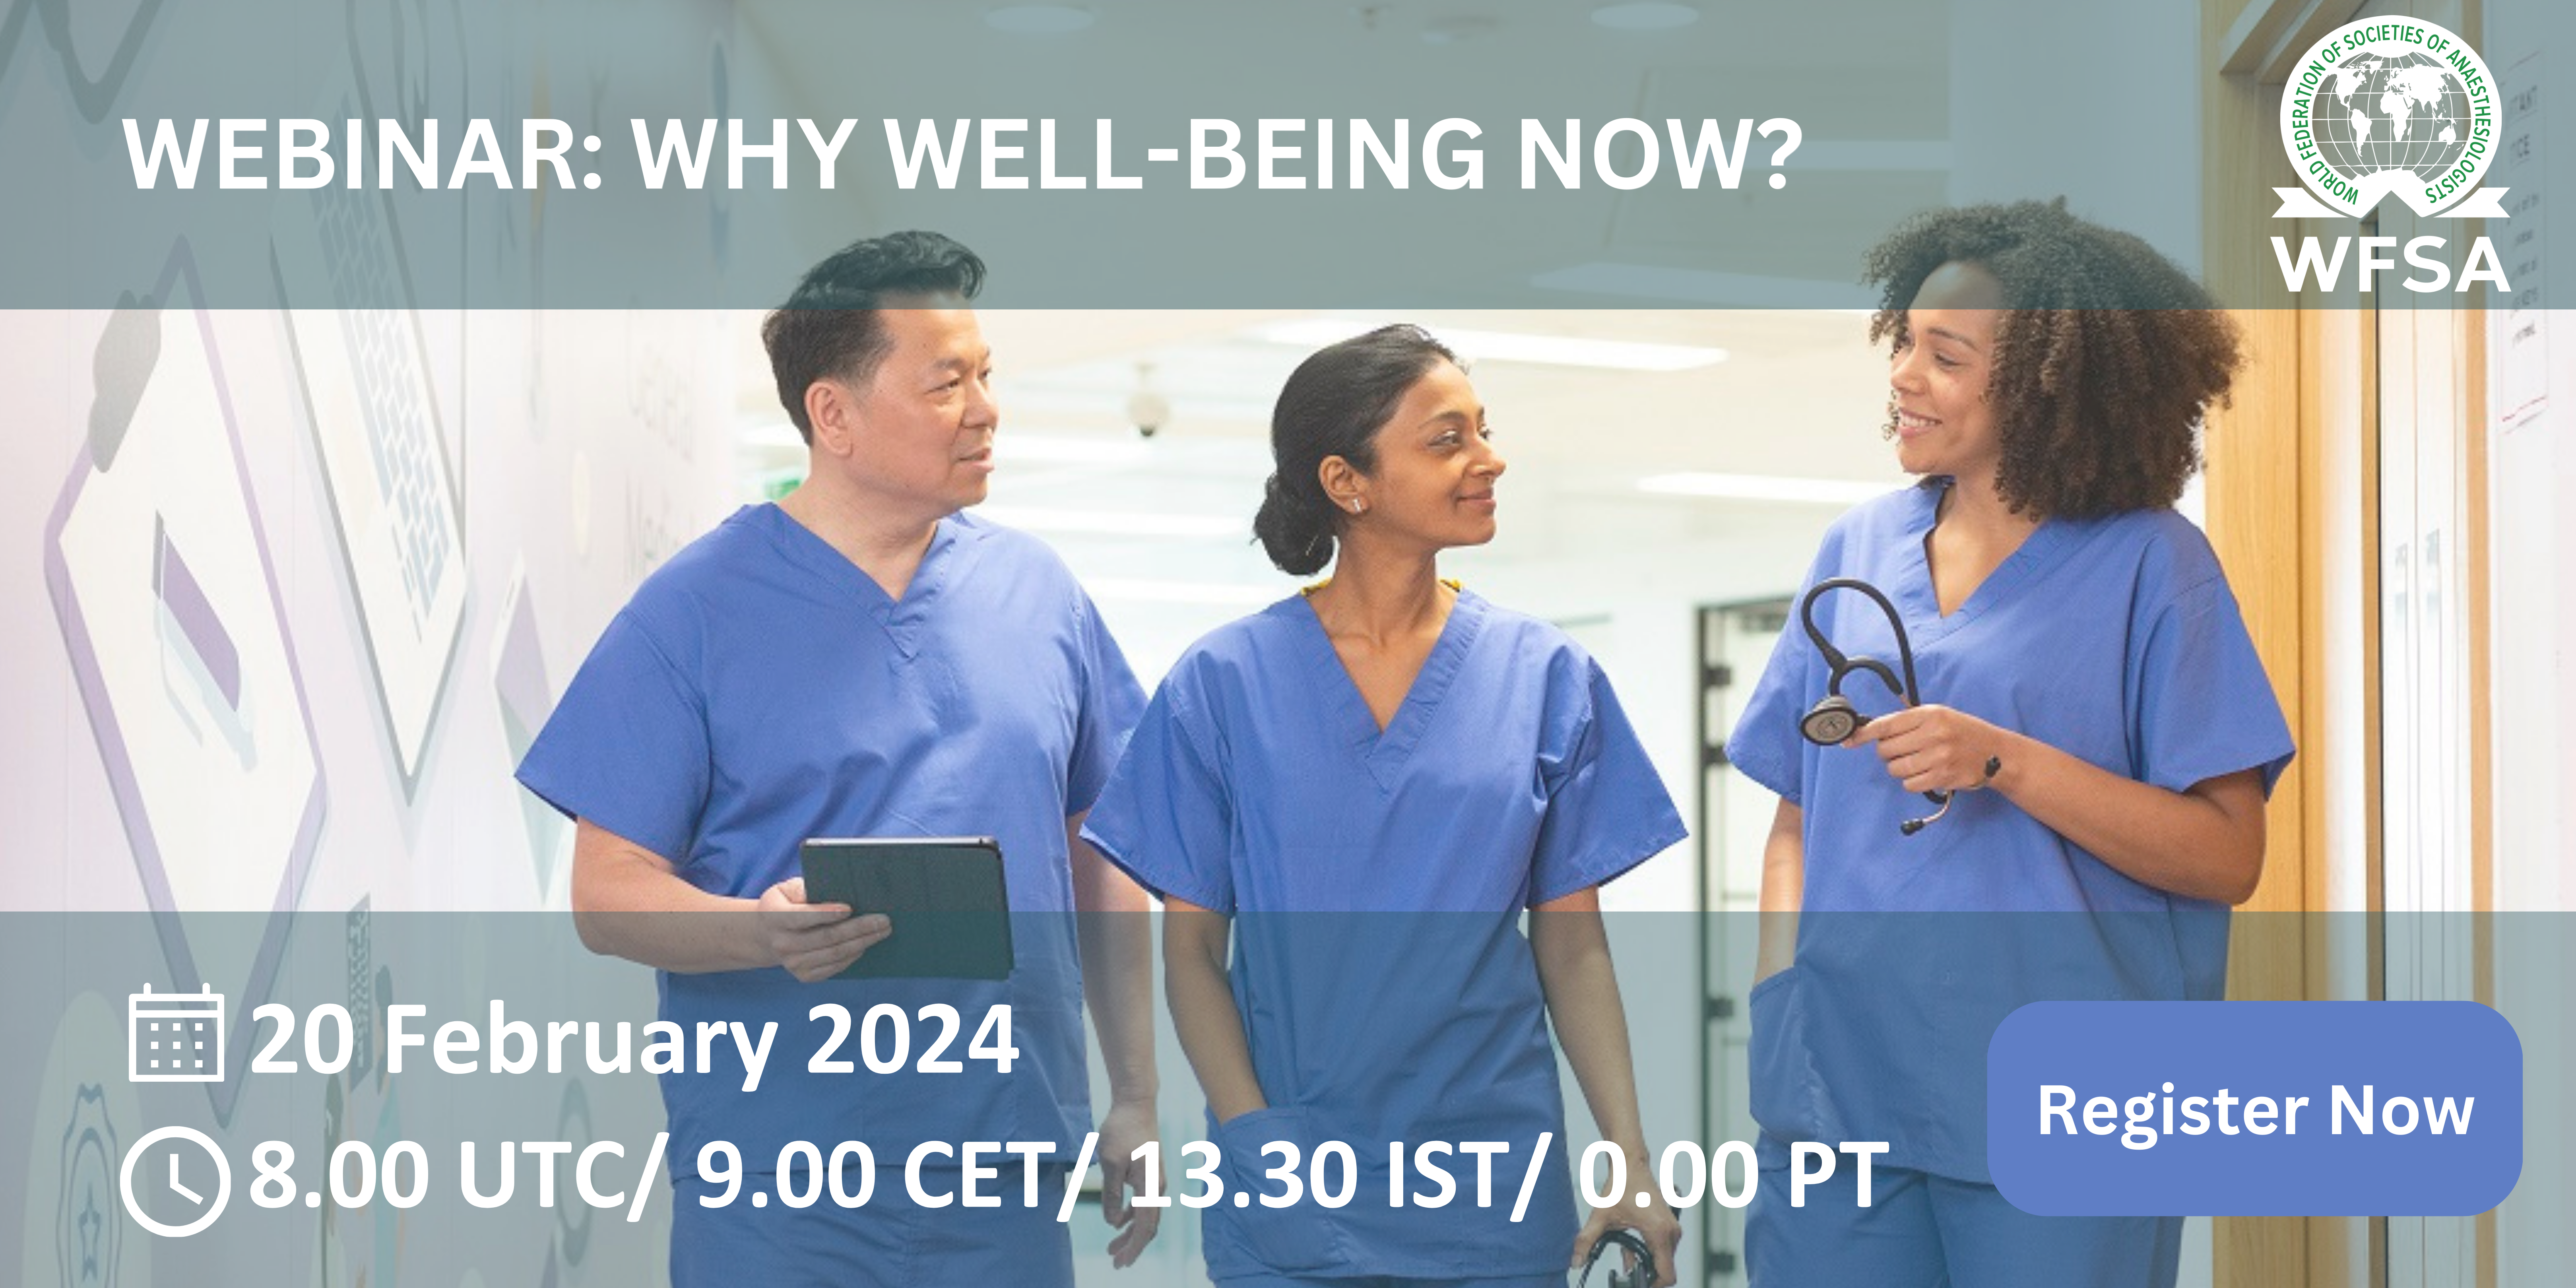 Annual Theme Webinar: Why Well-Being Now?